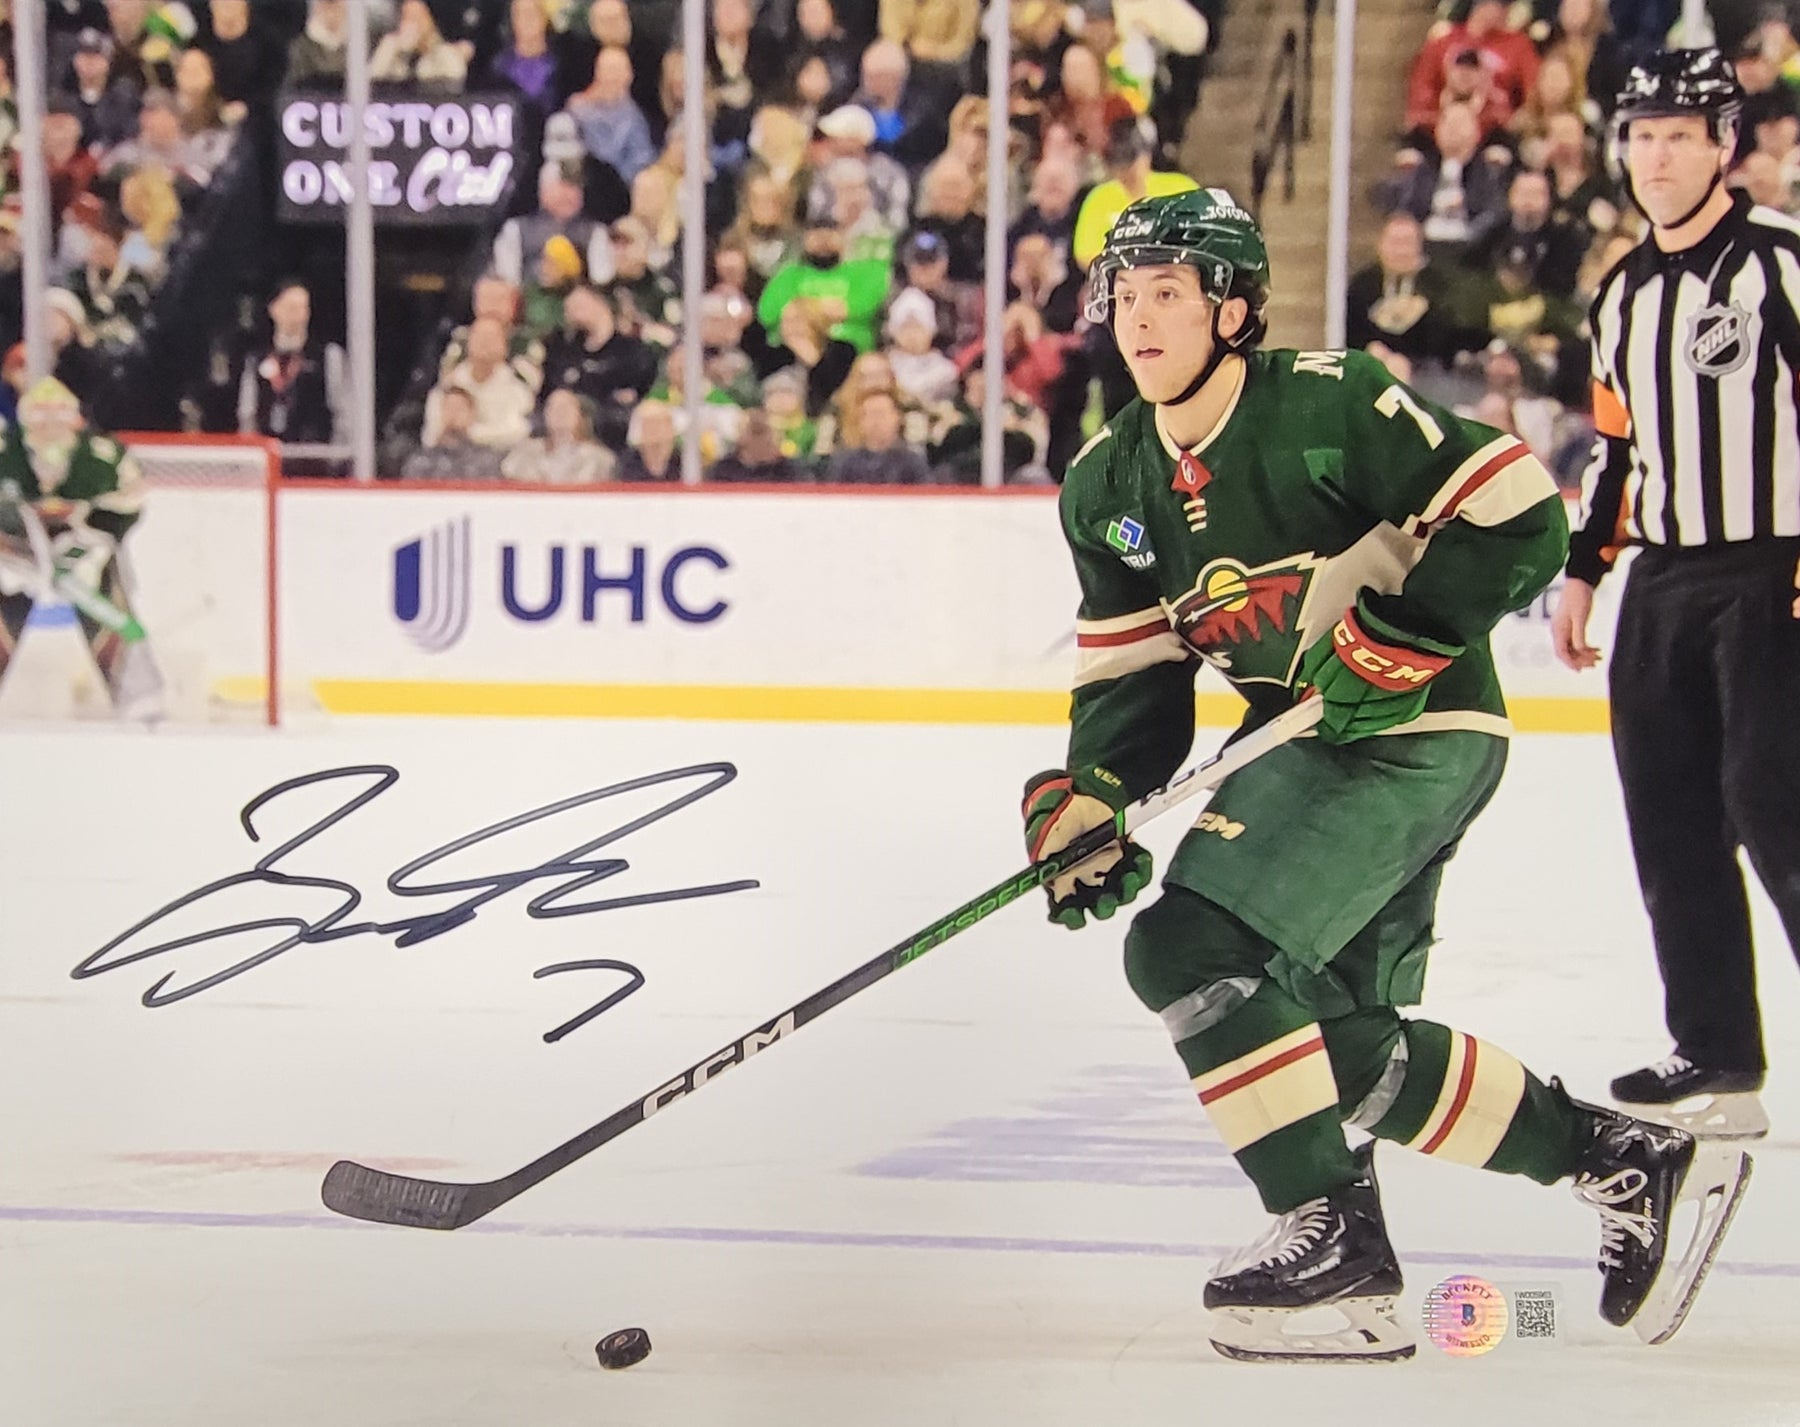 Brock Faber 'Green Jersey' Signed 11x14 Photo #4